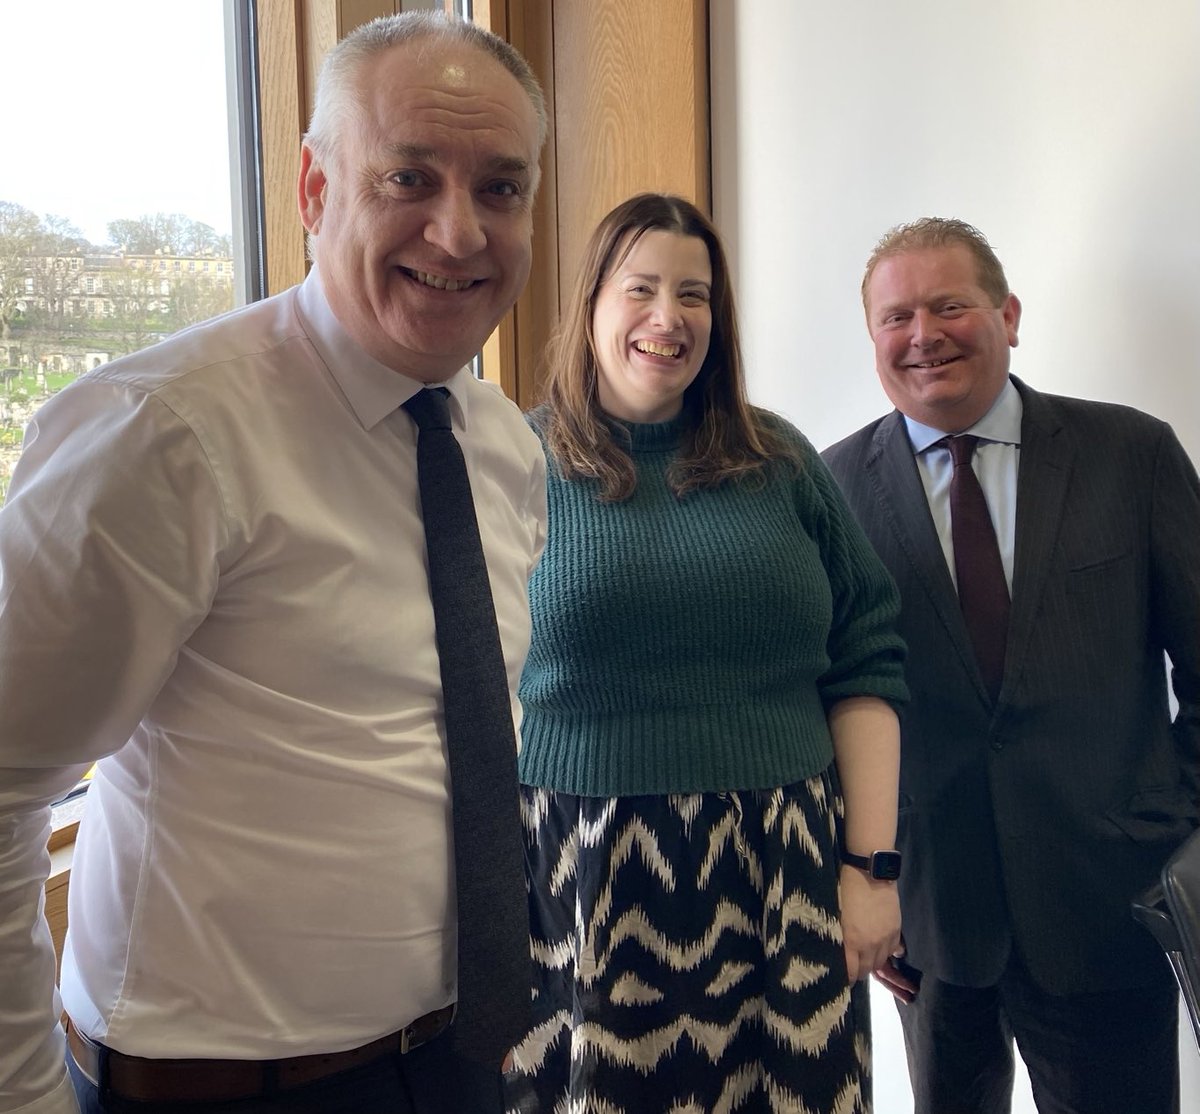 A productive meeting with Small Business Minister ⁦@RichardLochhead⁩ at Holyrood this morning. Covered everything from the ⁦@fsb_policy⁩ AI report to tackling regulation and costs for our members.